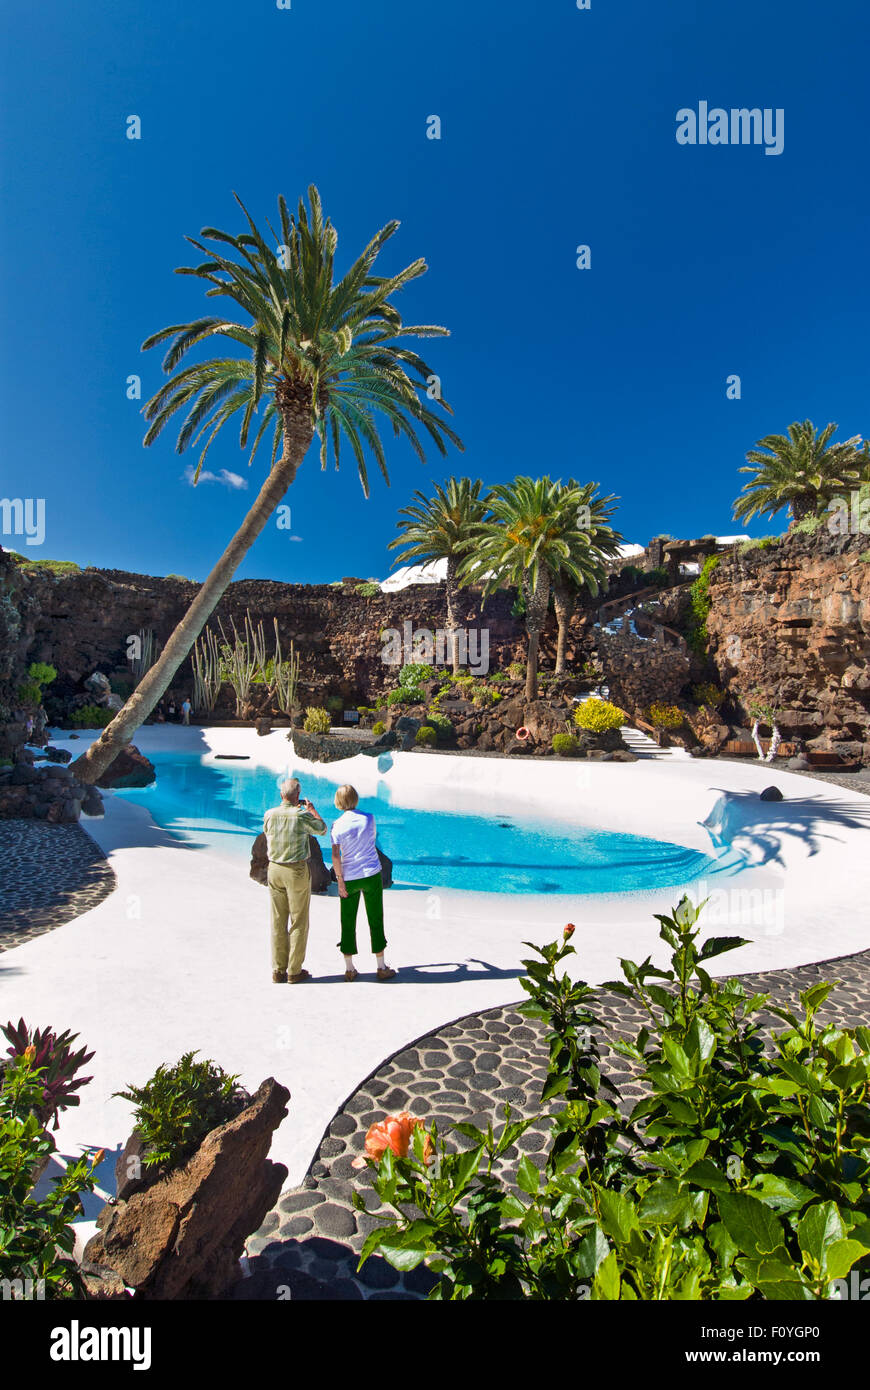 LANZAROTE Jameos del Agua Tourist couple taking photo of clear turquoise pool with palms and tropical plants, Manrique, Lanzarote Canary Islands Spain Stock Photo